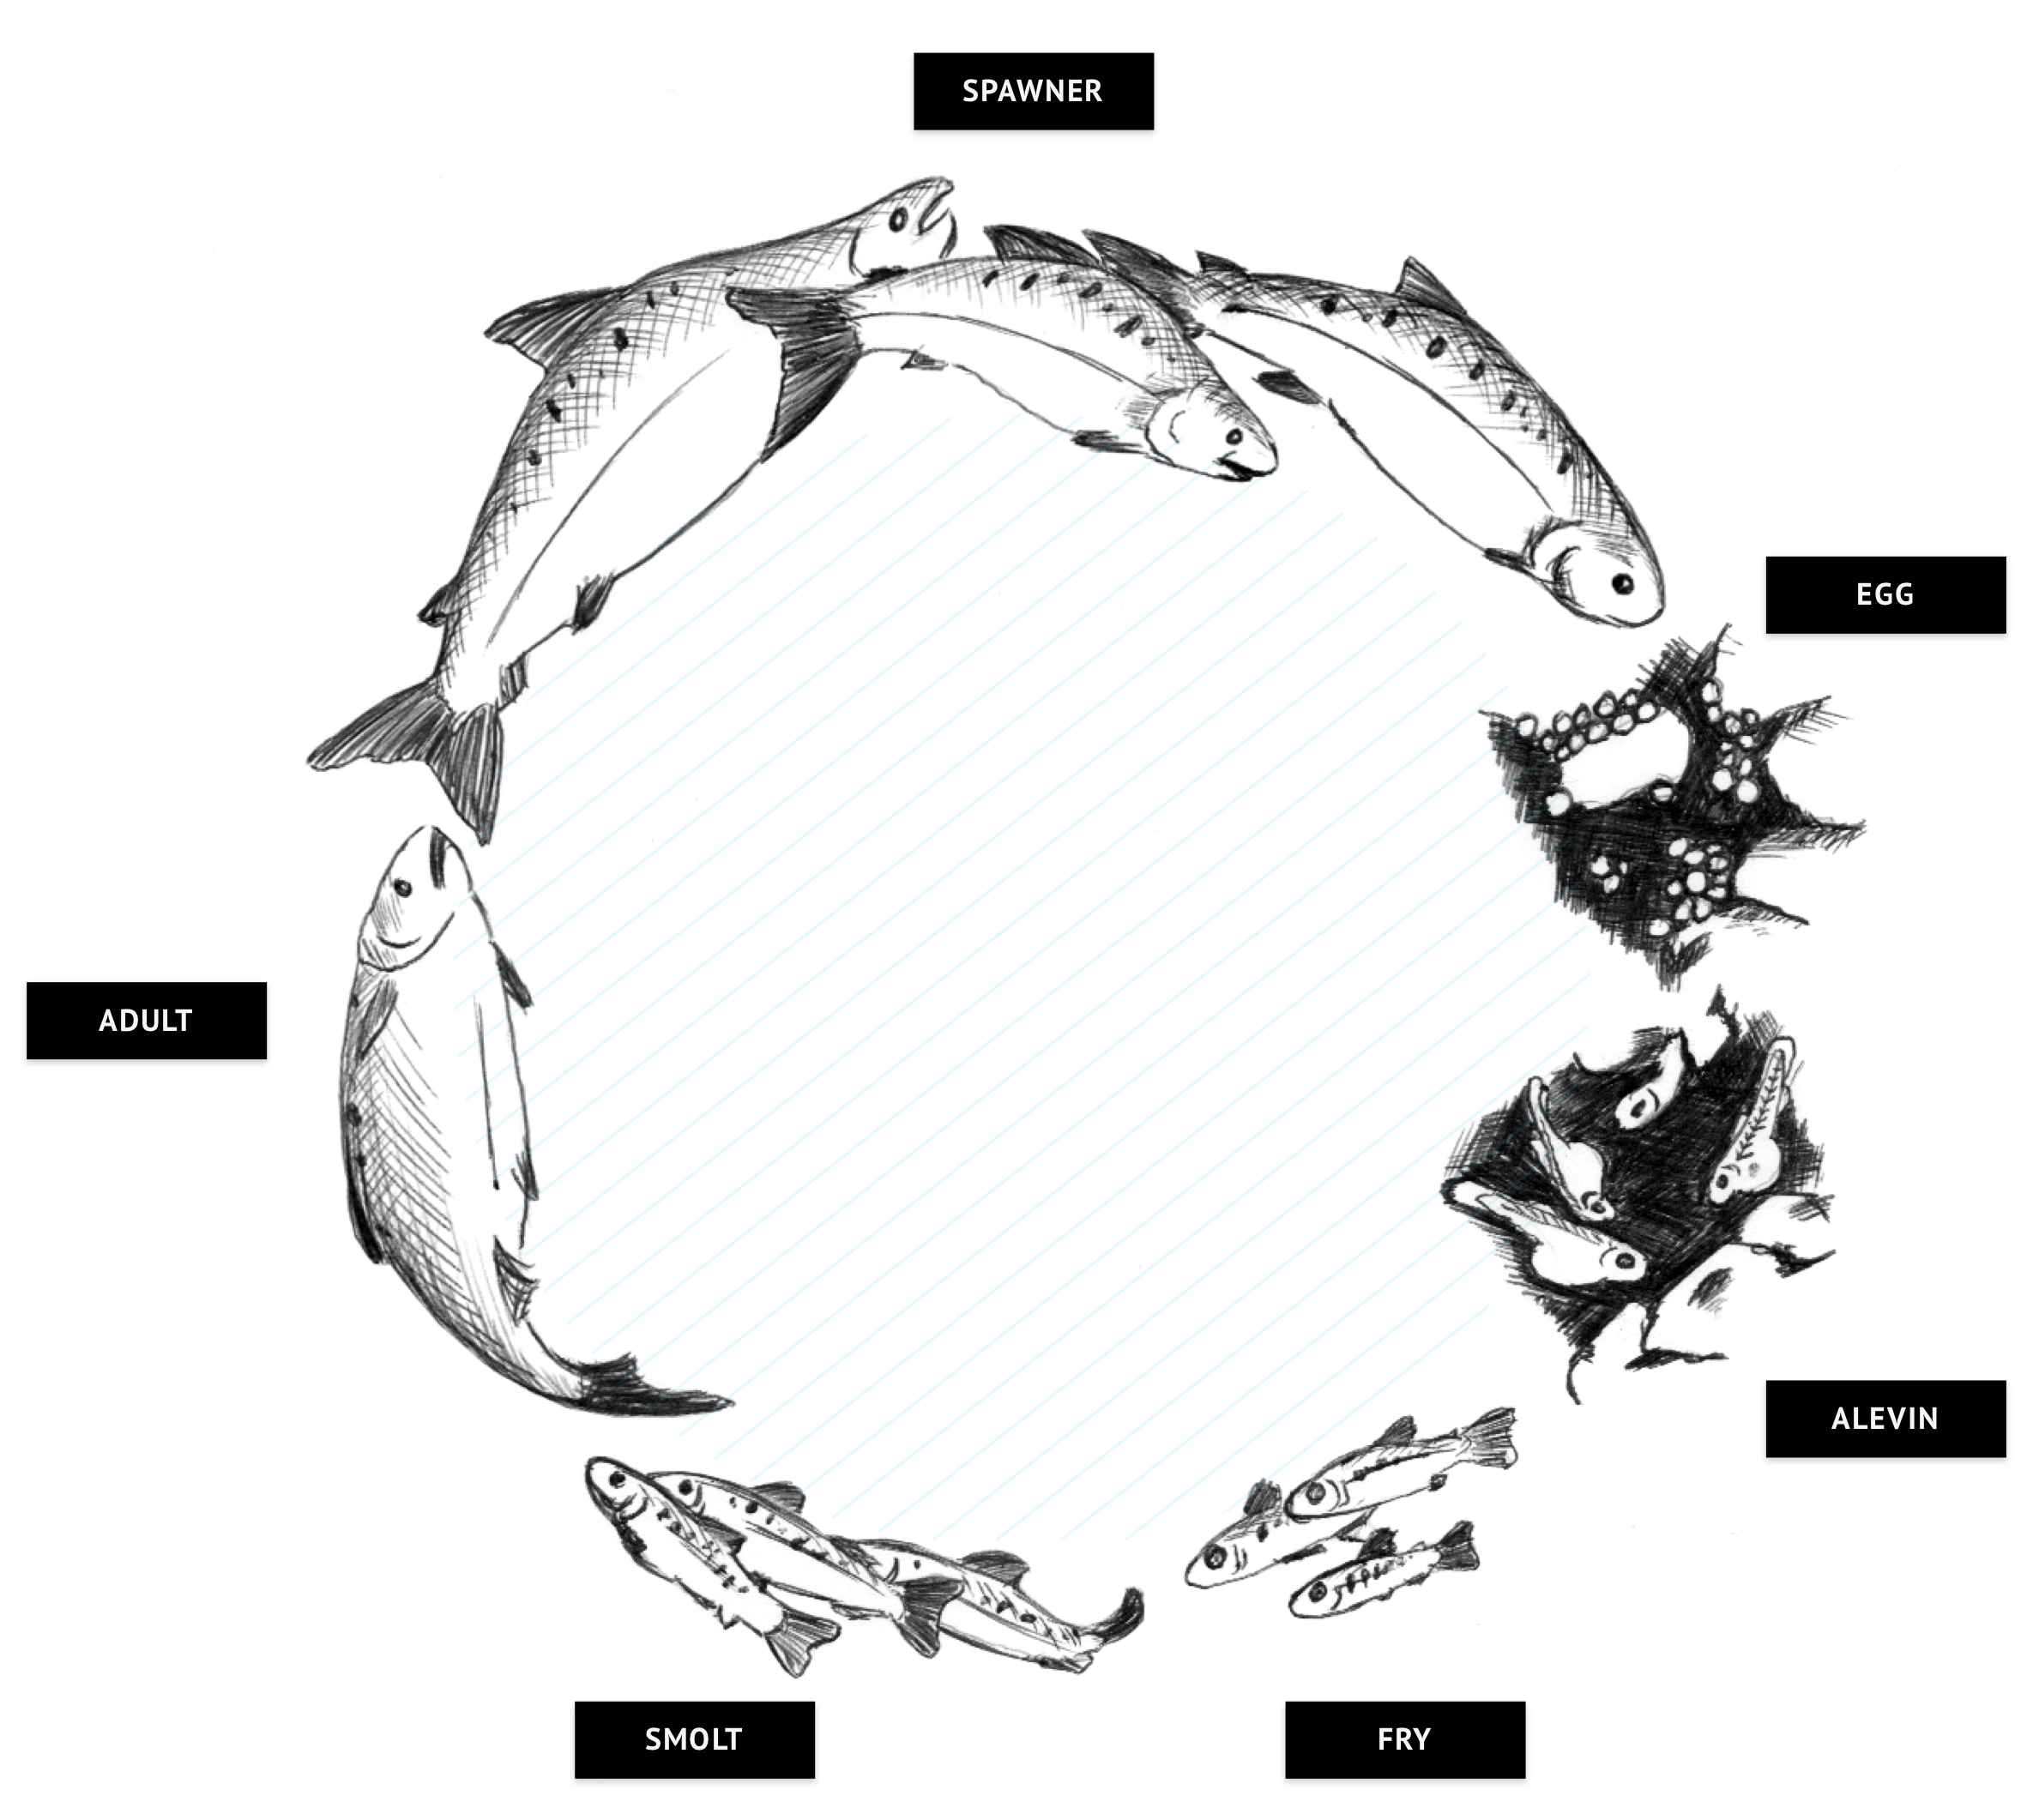 Illustration of salmon life cycle, showing progression from egg to adult salmon, ending in procreation and starting the cycle anew